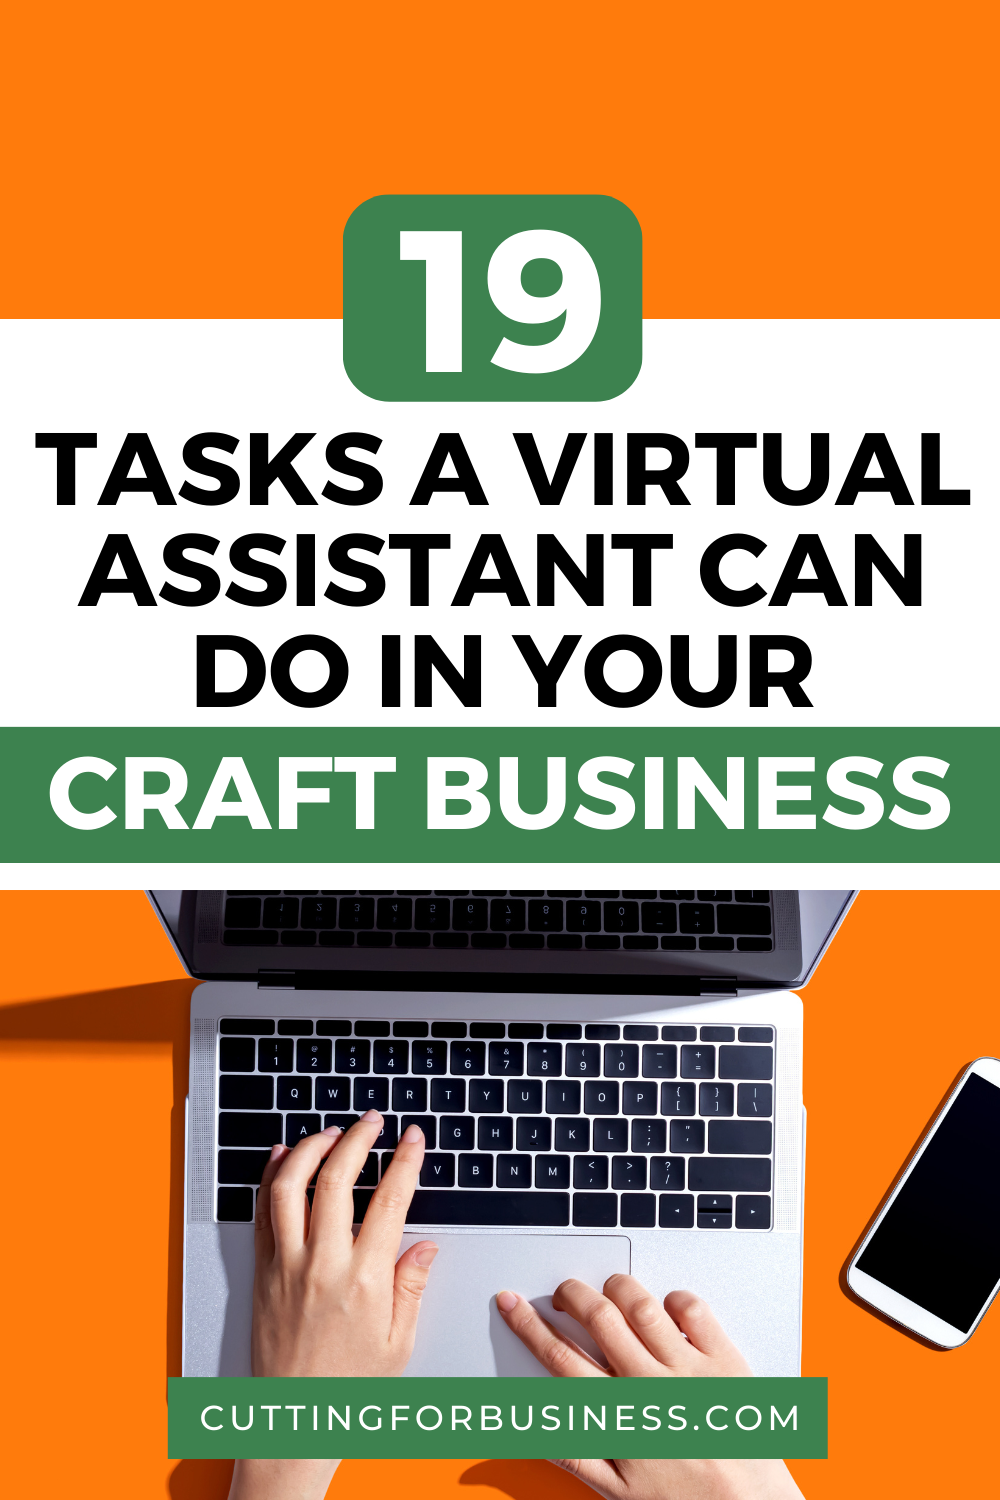 19 Tasks a Virtual Assistant Can Do in Your Craft Business - cuttingforbusiness.com